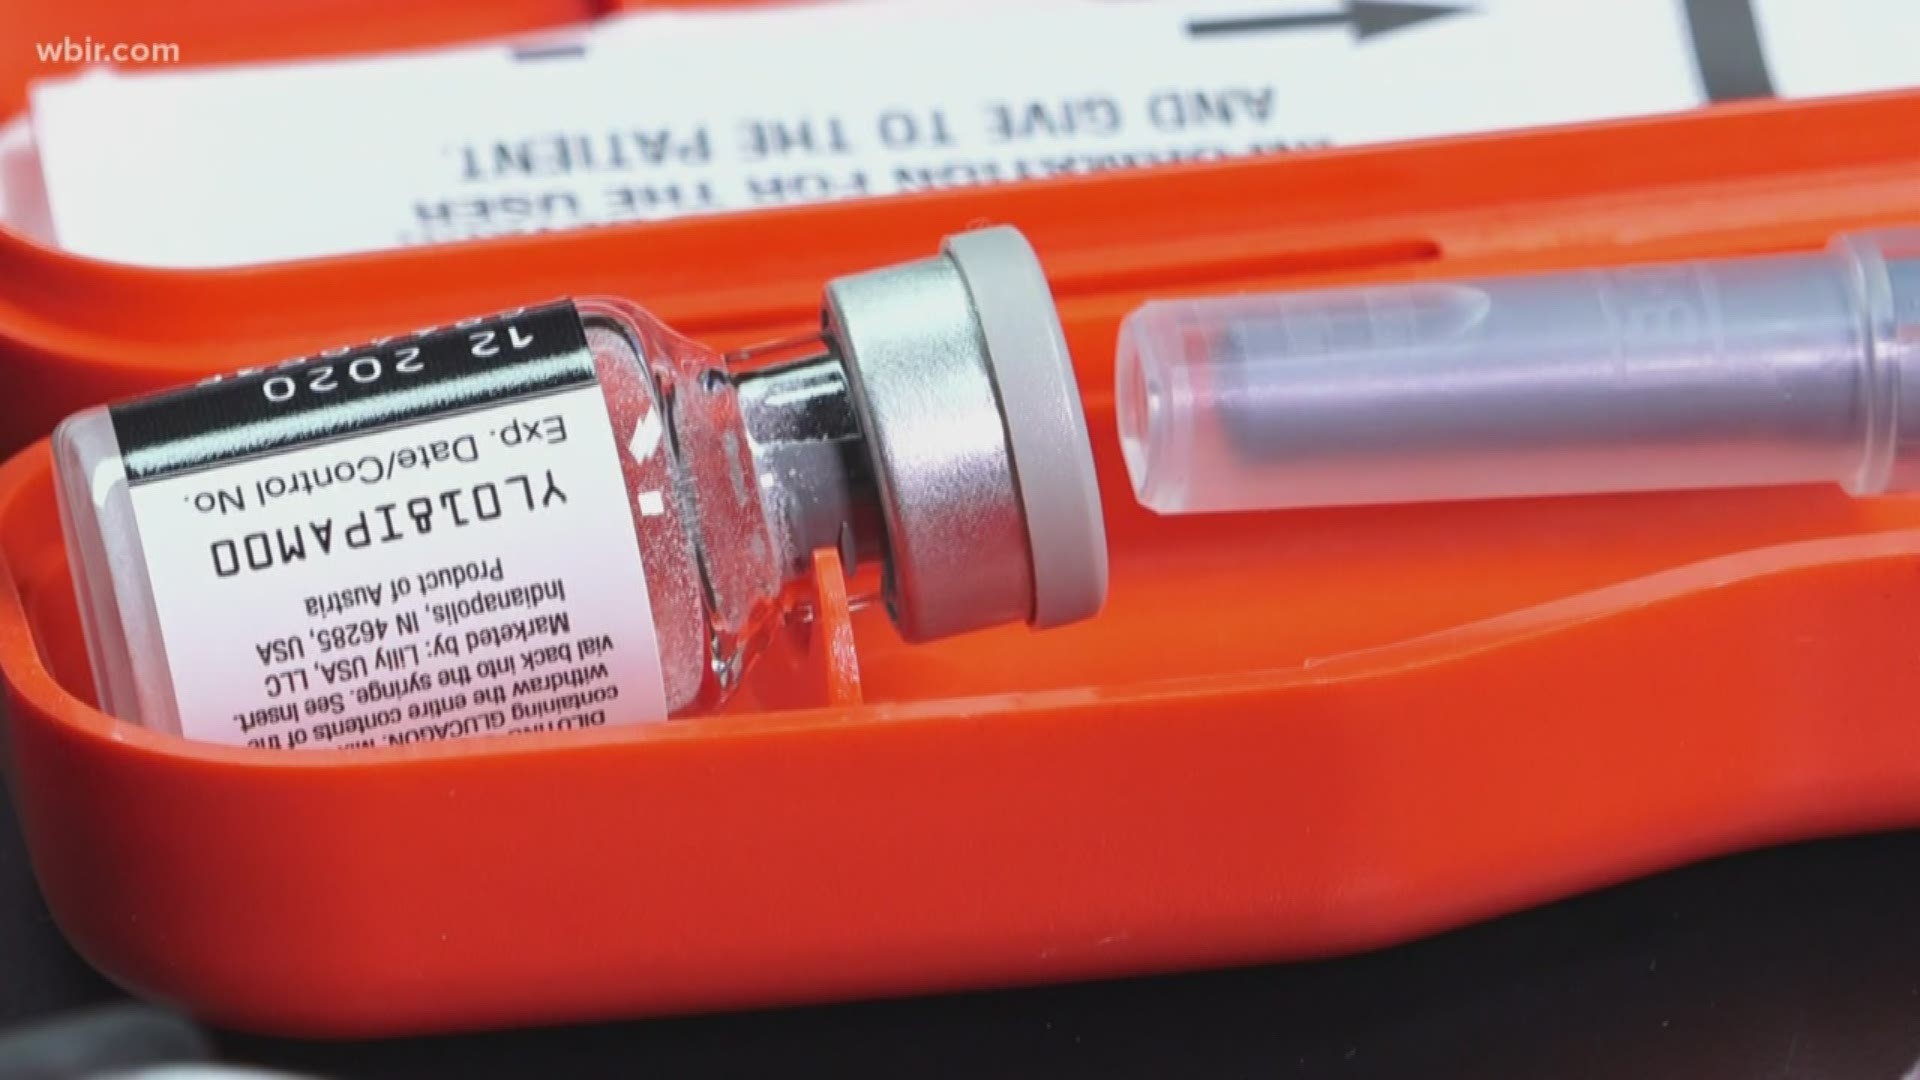 Thousands of Tennesseans could see the price of insulin drop dramatically. A bill proposed Thursday would cap co-pays at $100 each month if passed.